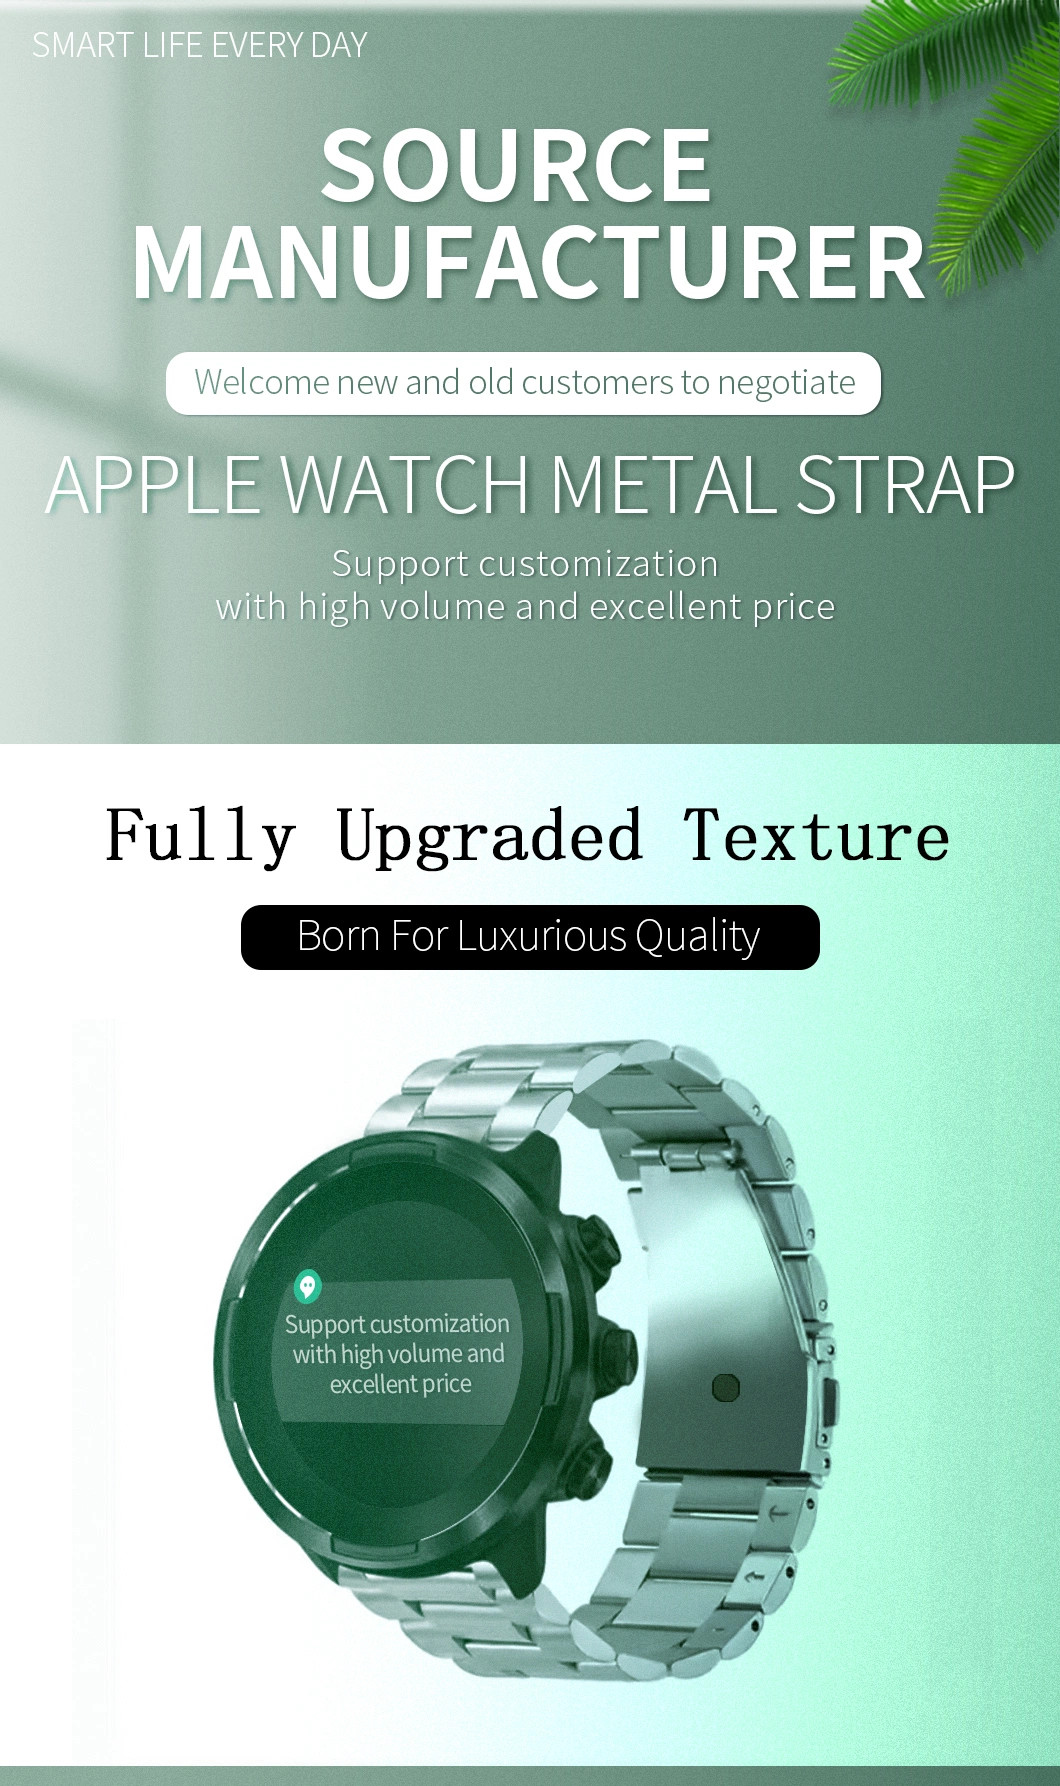 Customized Wrist Metal Stainless Steel Adjustable Watch Strap for Apple Watch Part